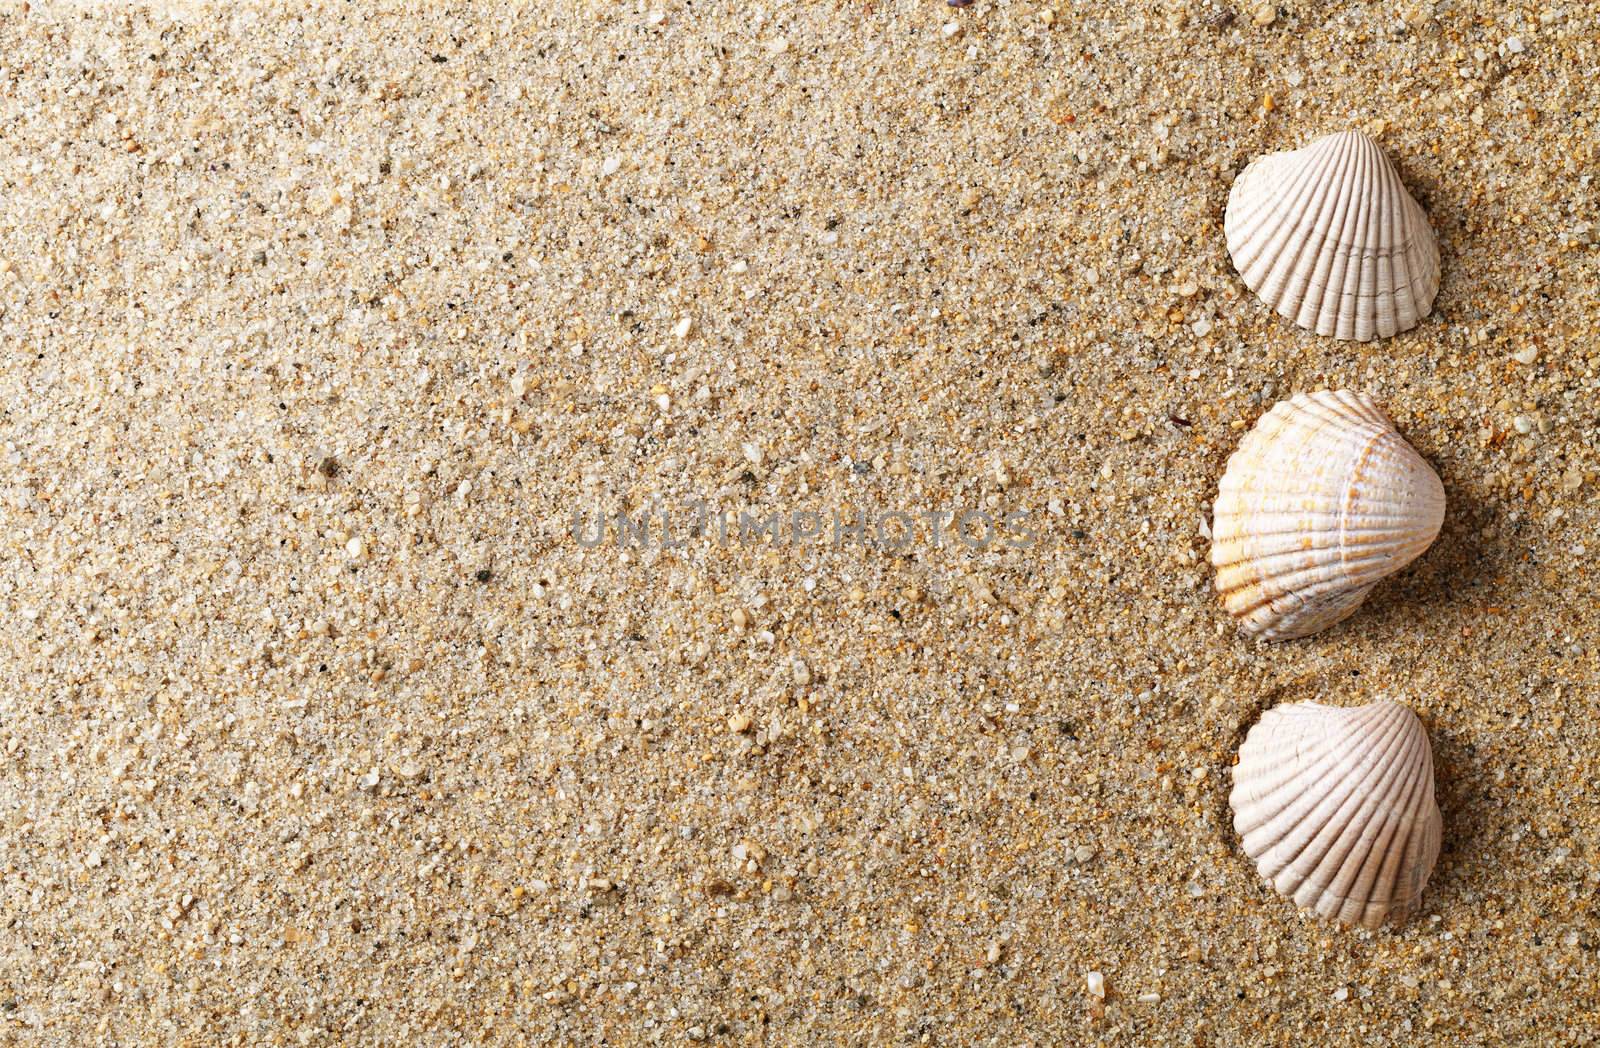 Sea shells on sand. Summer beach background with copy space. Top view